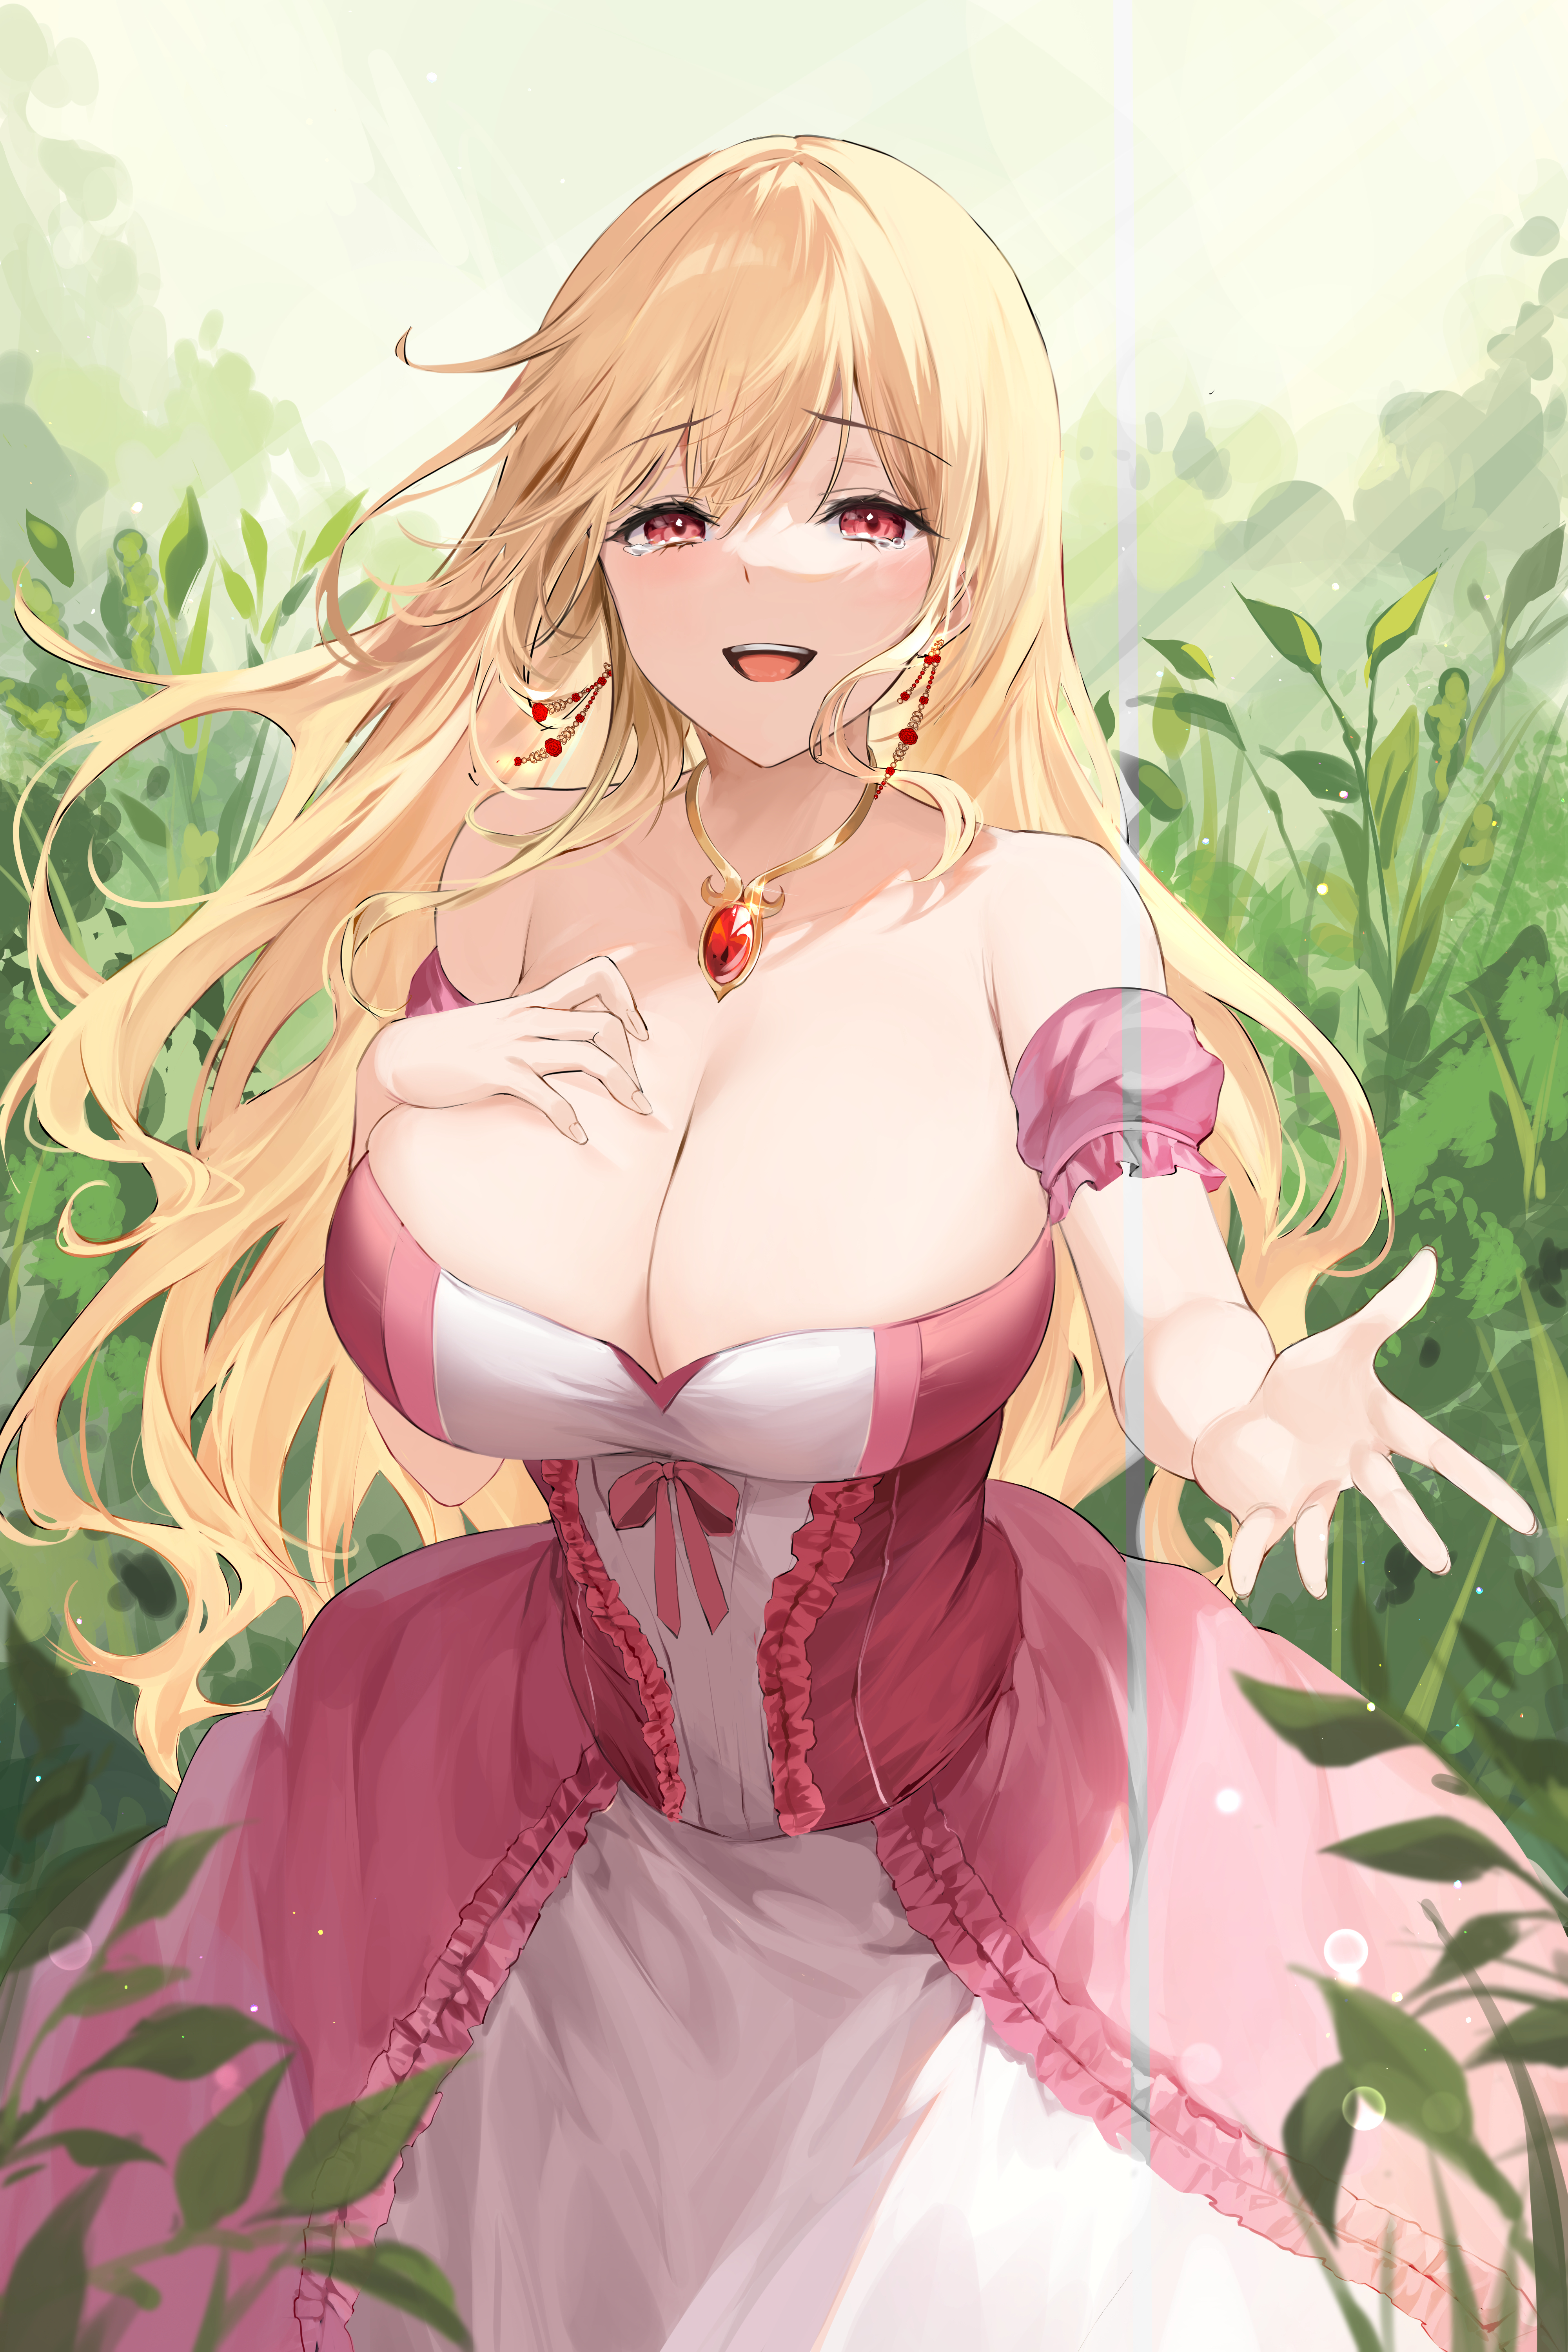 Anime Girls Plants Blonde Red Eyes Necklace 4000x6000